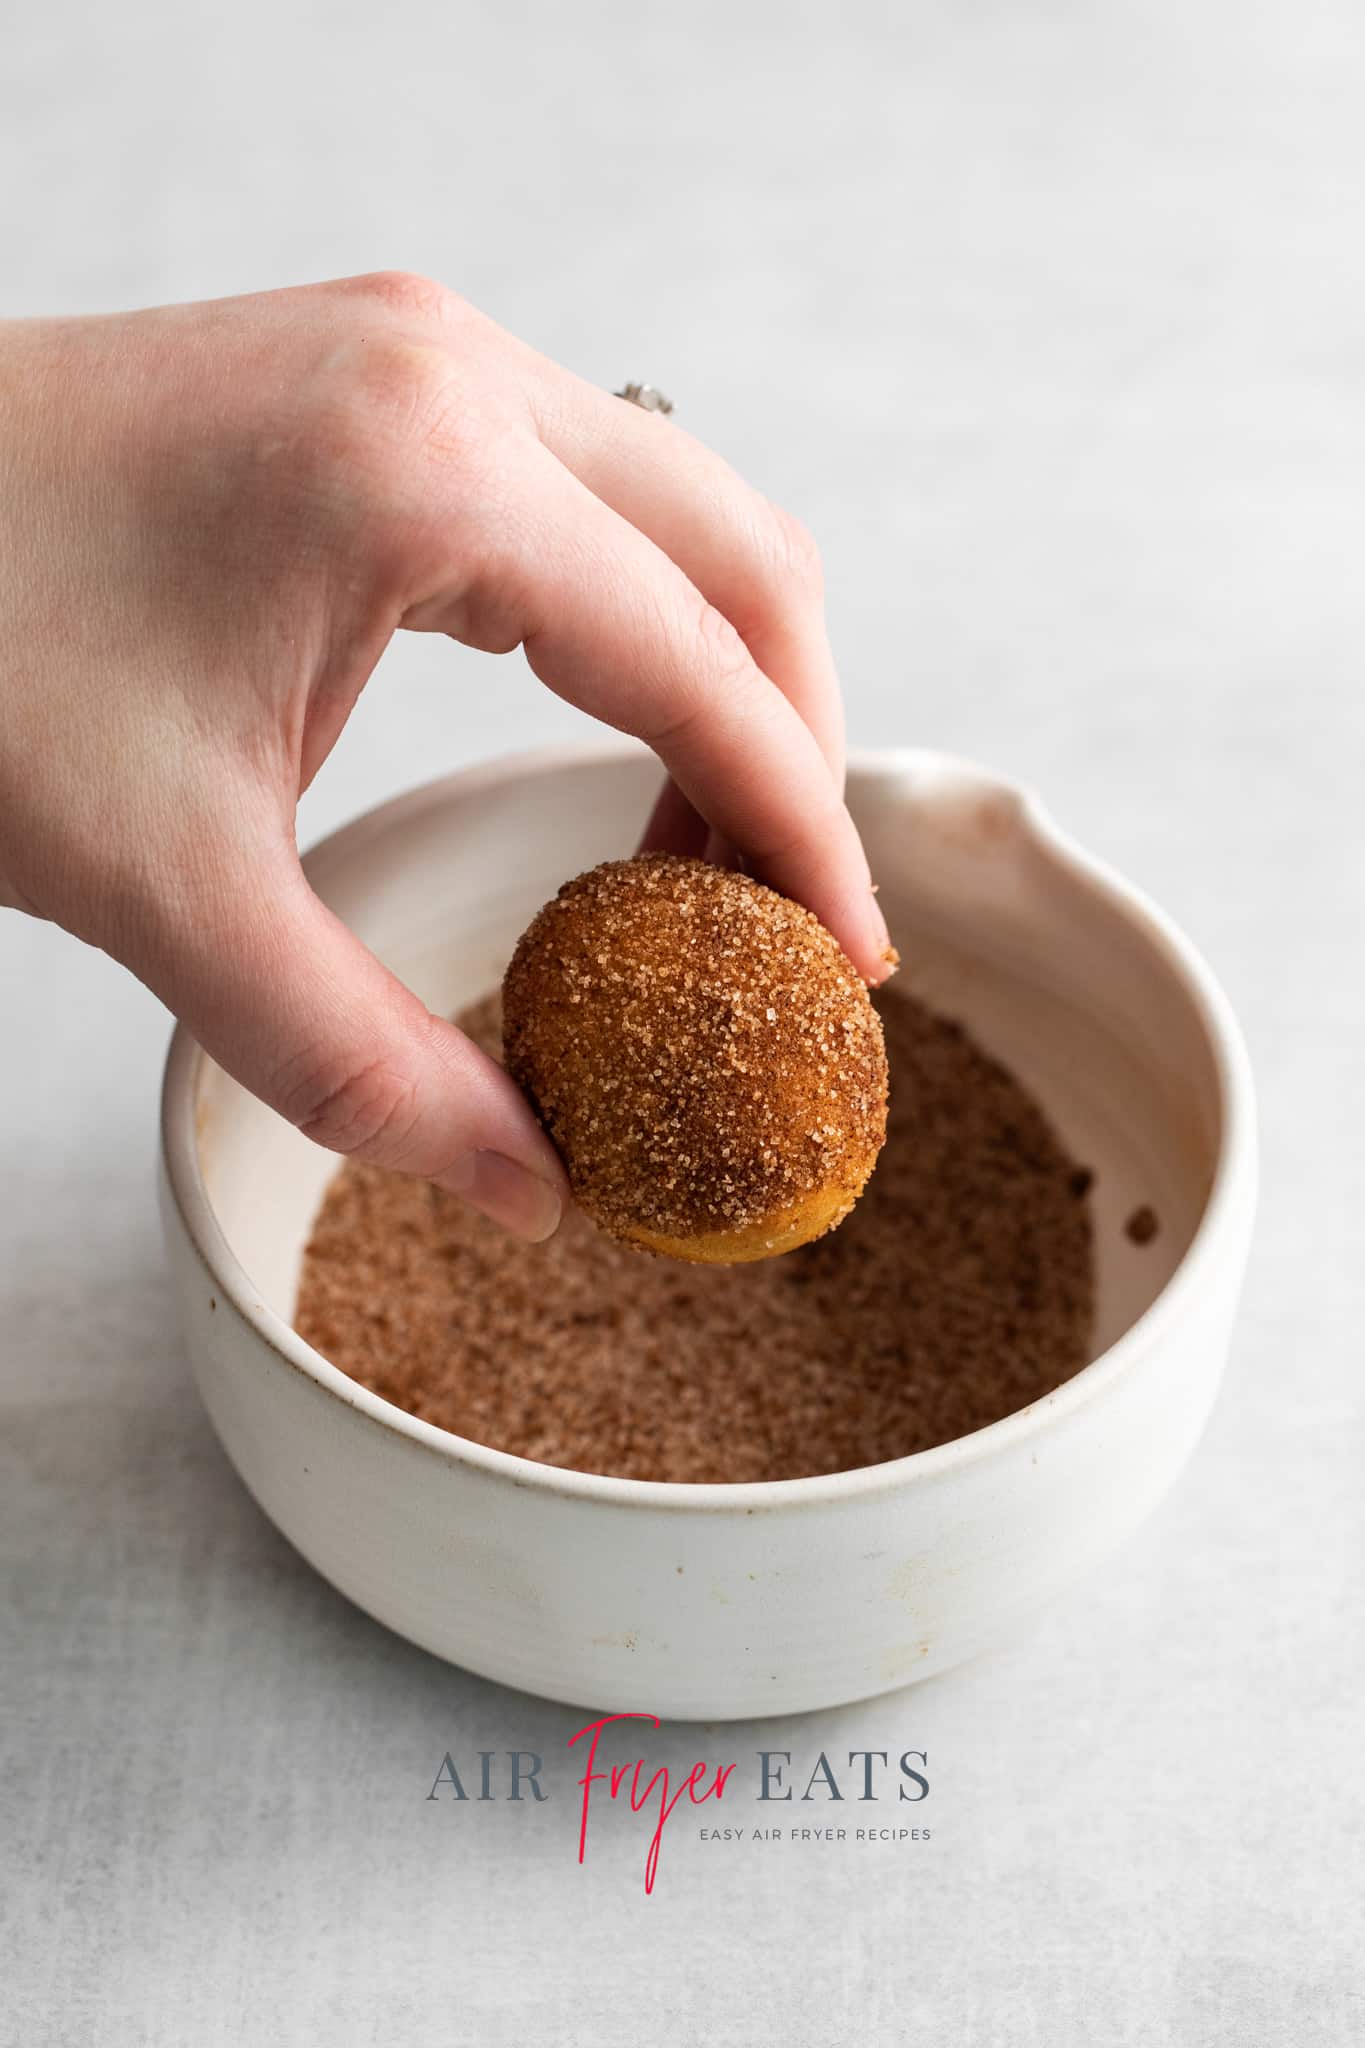 Photo of a hand dipping an Air Fryer Donut Hole into a small white bowl filled with a cinnamon-sugar topping. 